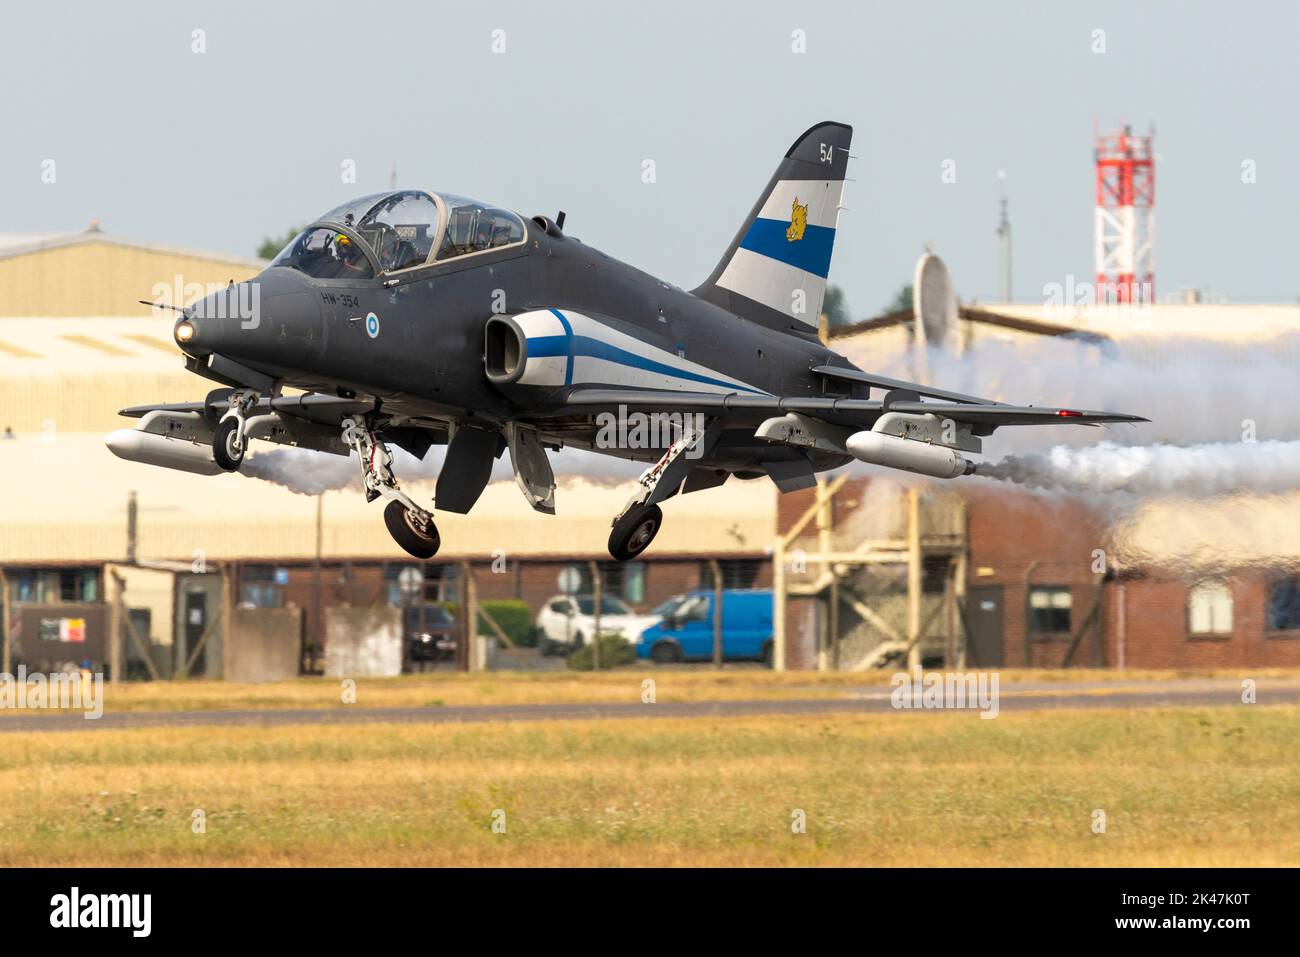 Finnish Air Force BAe Hawk Mk.51 jet trainer plane at the Royal International Air Tattoo, RIAT airshow, RAF Fairford, Gloucestershire, UK. Taking off Stock Photo